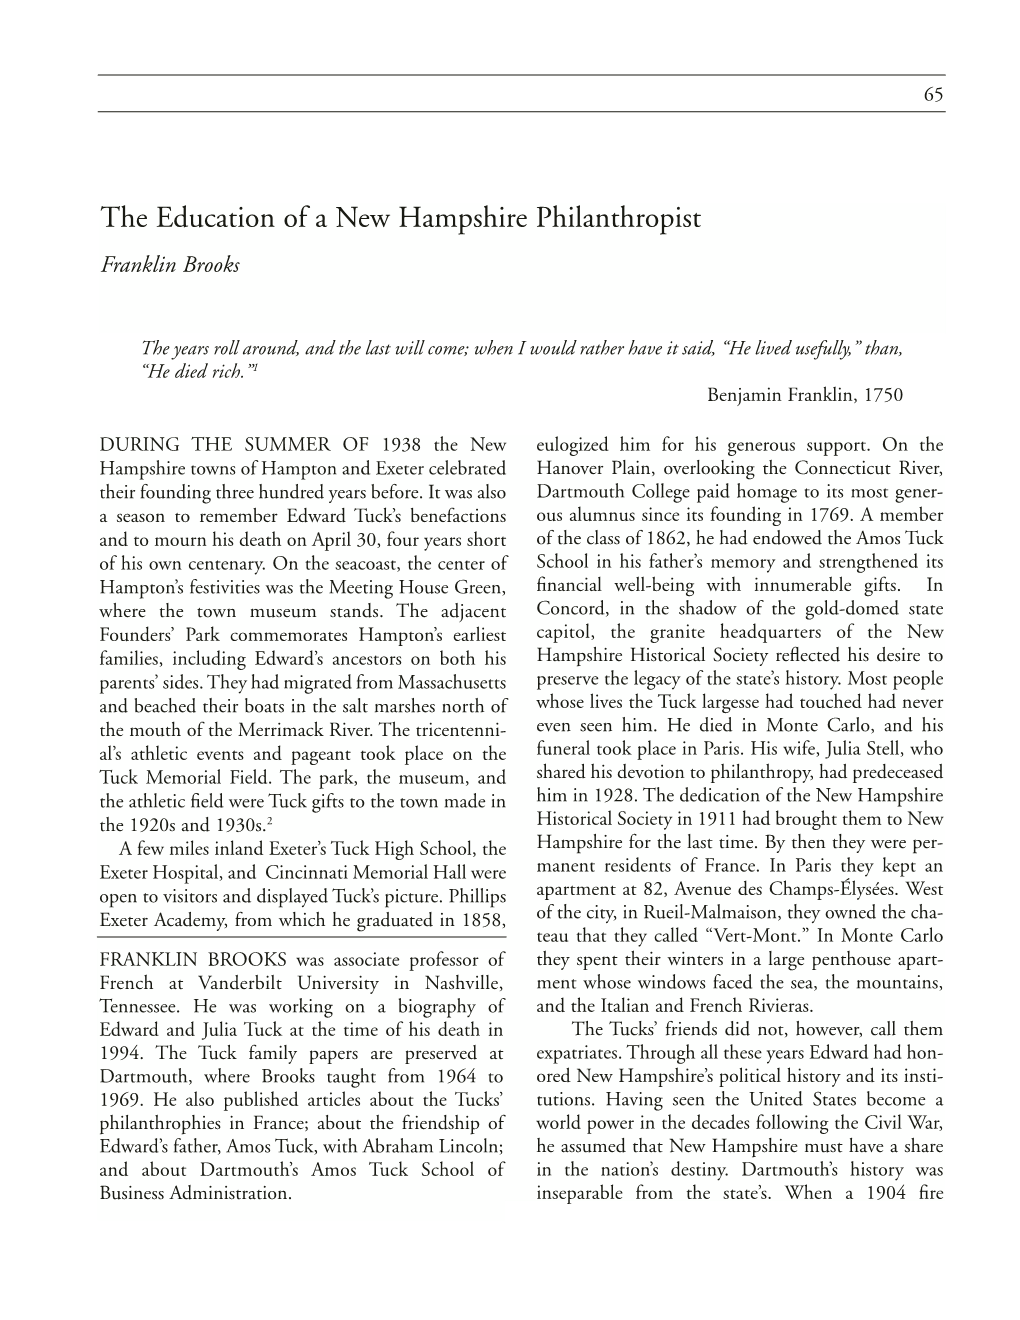 The Education of a New Hampshire Philanthropist Franklin Brooks